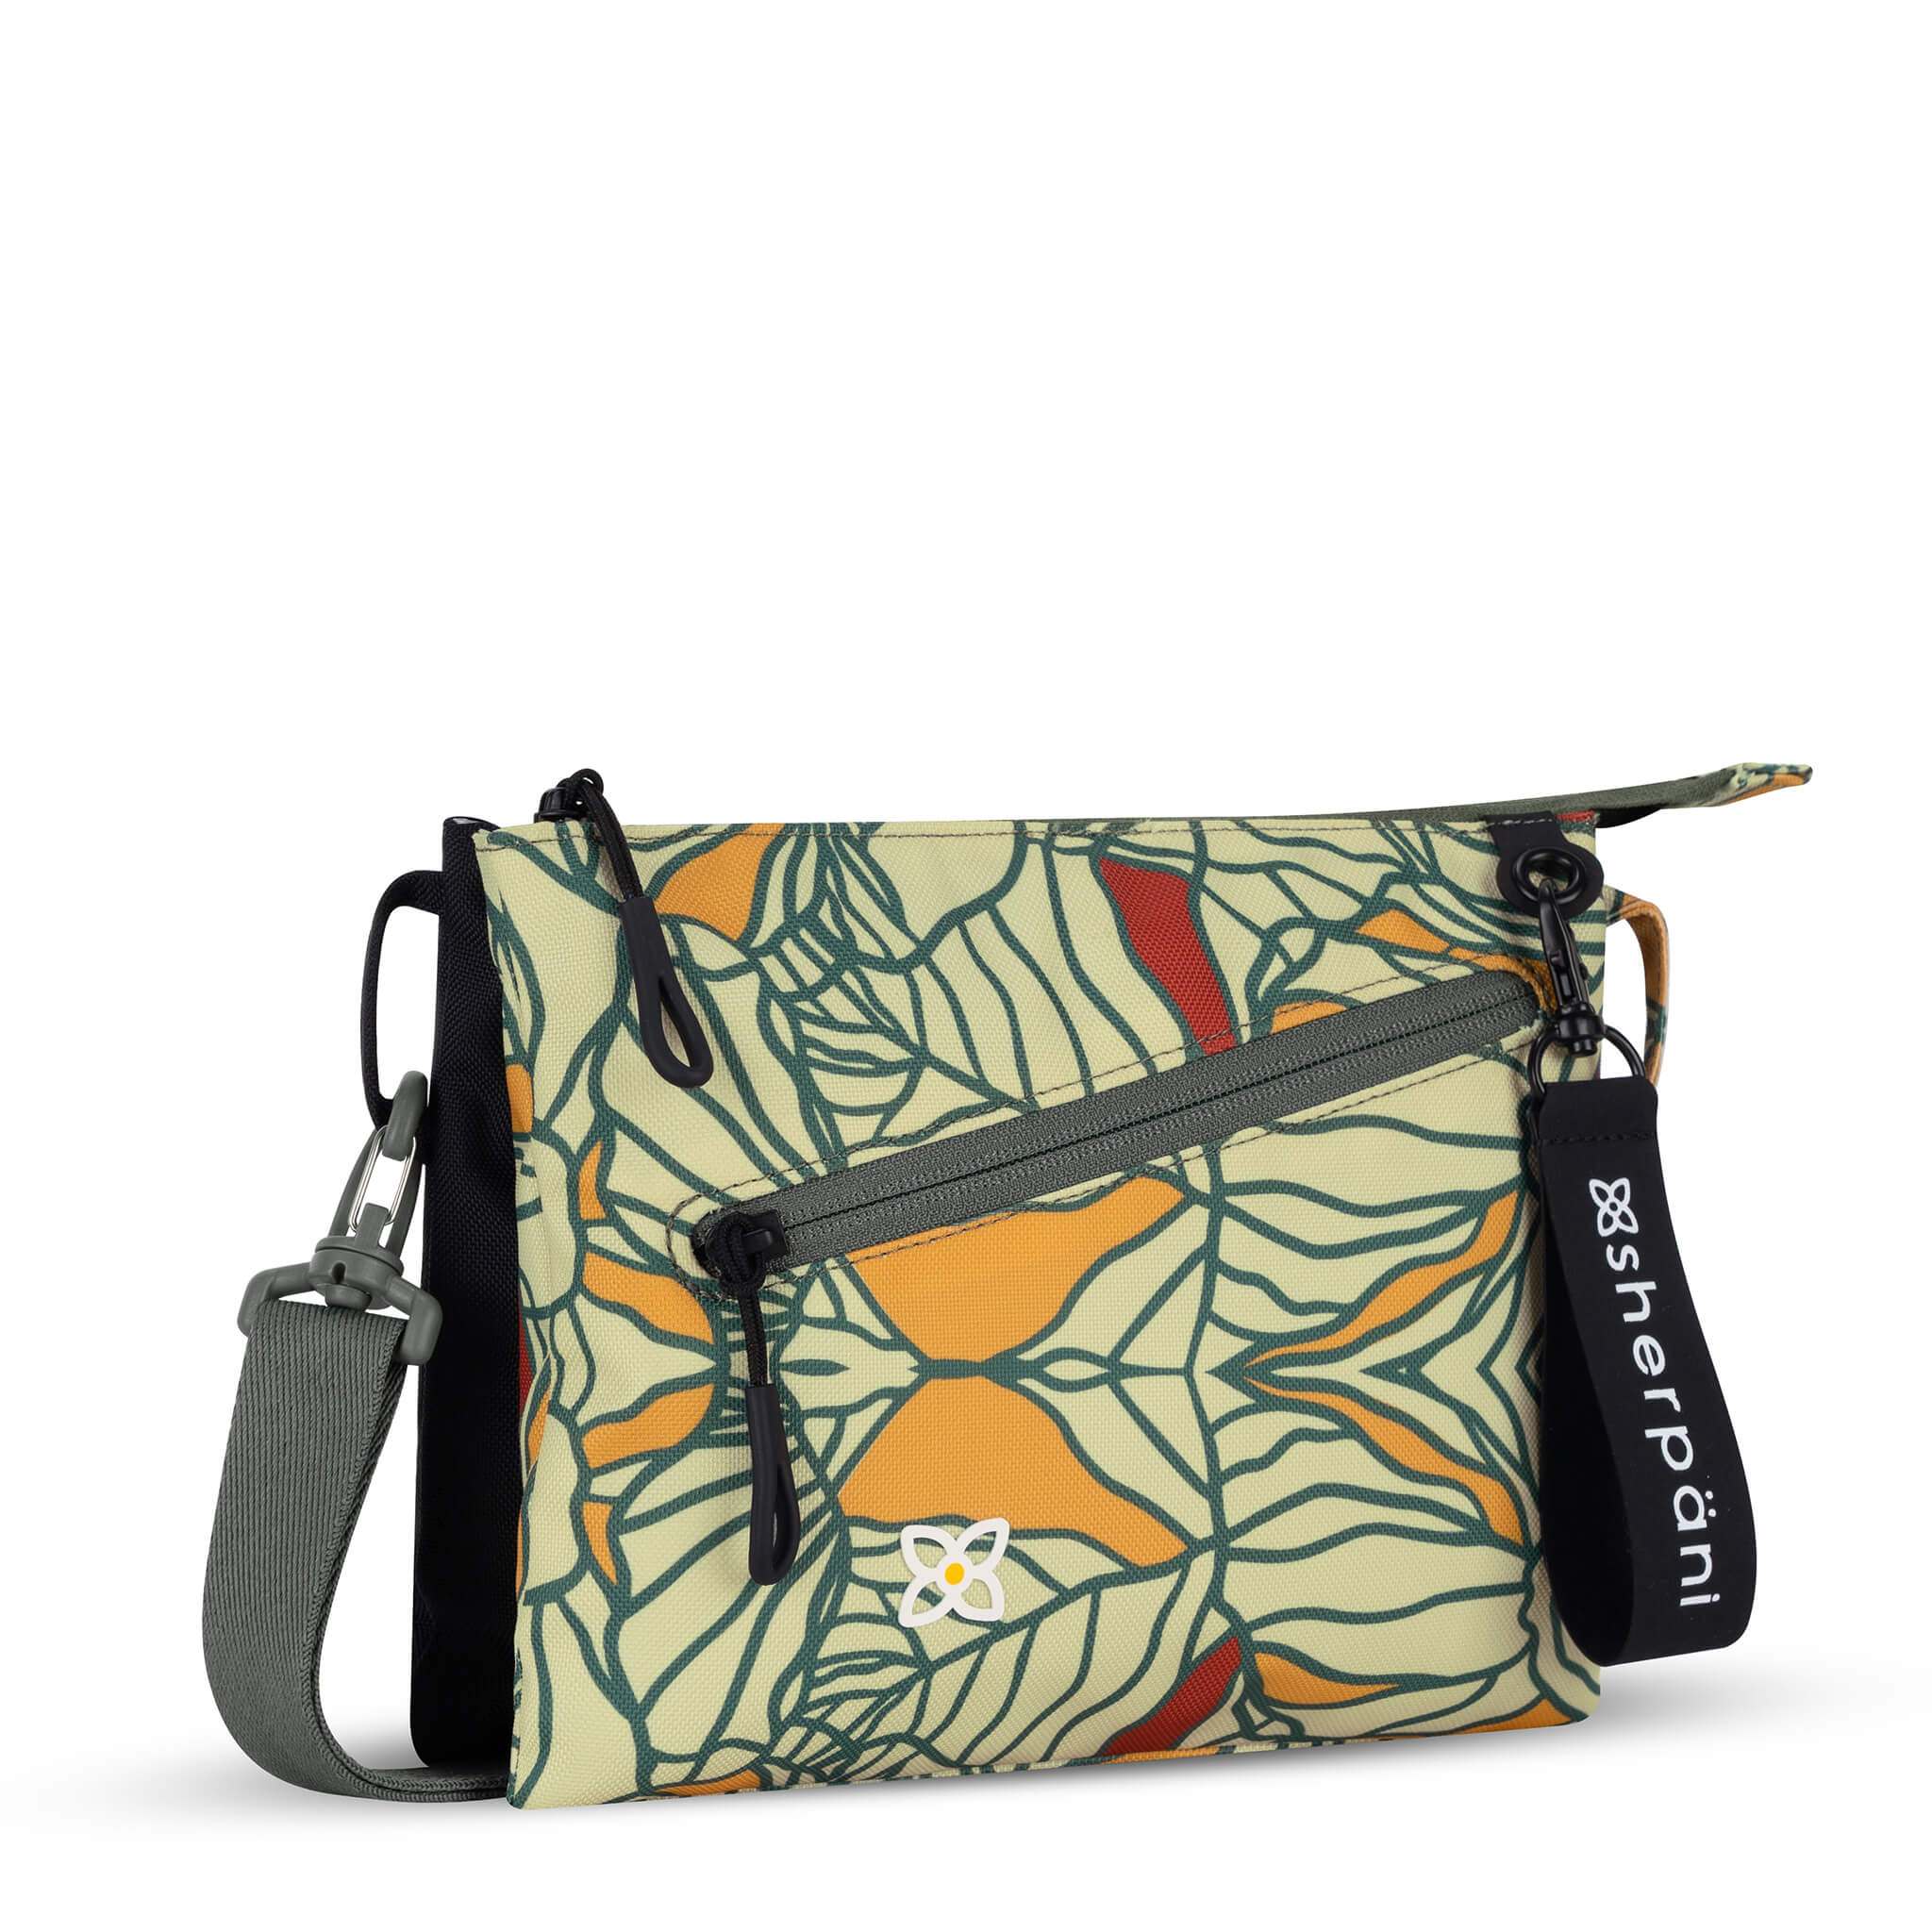 Angled front view of Sherpani small crossbody bag, the Zoom in Fiori. Special features of the Zoom include RFID protection, adjustable crossbody strap, removable strap, removable keychain, outside zipper pocket, internal divider, internal zipper pockets and back slip pocket. The Fiori colorway is two-toned in black and a floral pattern with a neutral color palette.